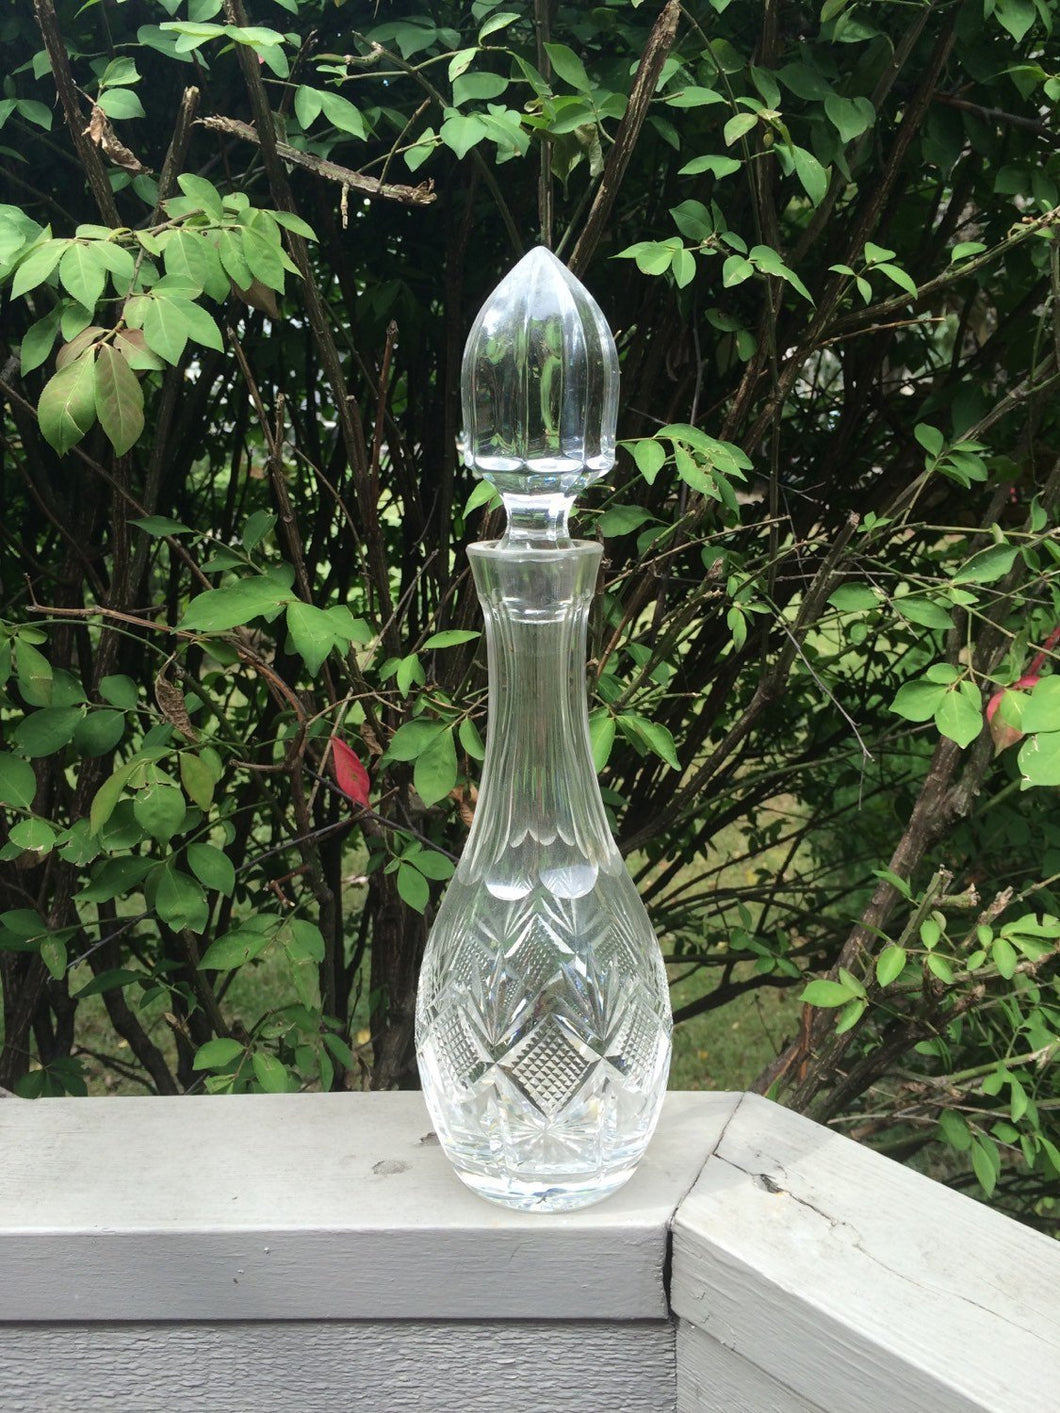 Vintage Lead Crystal Decanter. Liquor Bottle. Etched Diamond Pattern. Glassware. Decanter with Crystal Stopper. Barware. Serving. Tableware. - Scotch Street Vintage